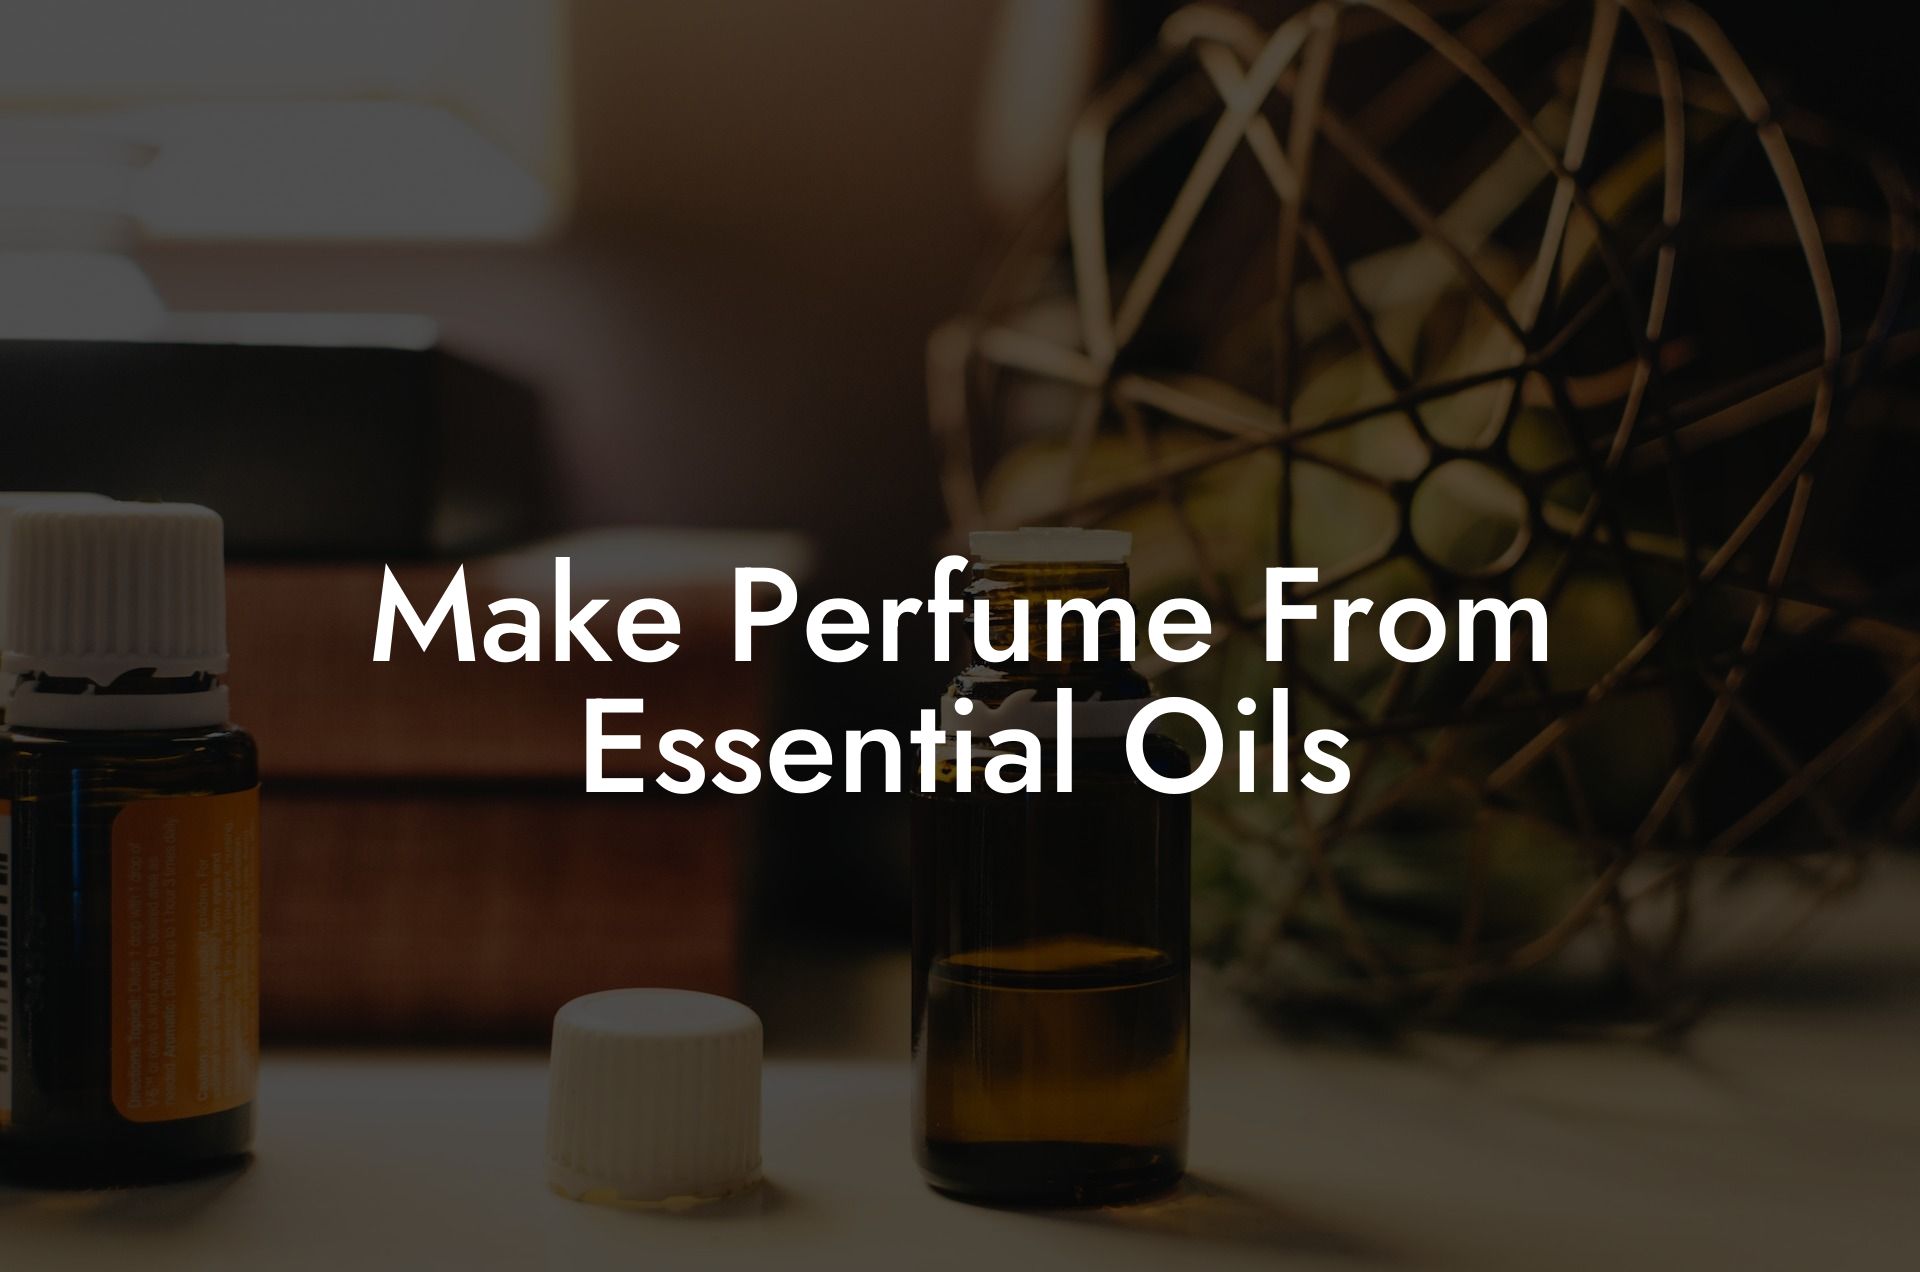 Make Perfume From Essential Oils